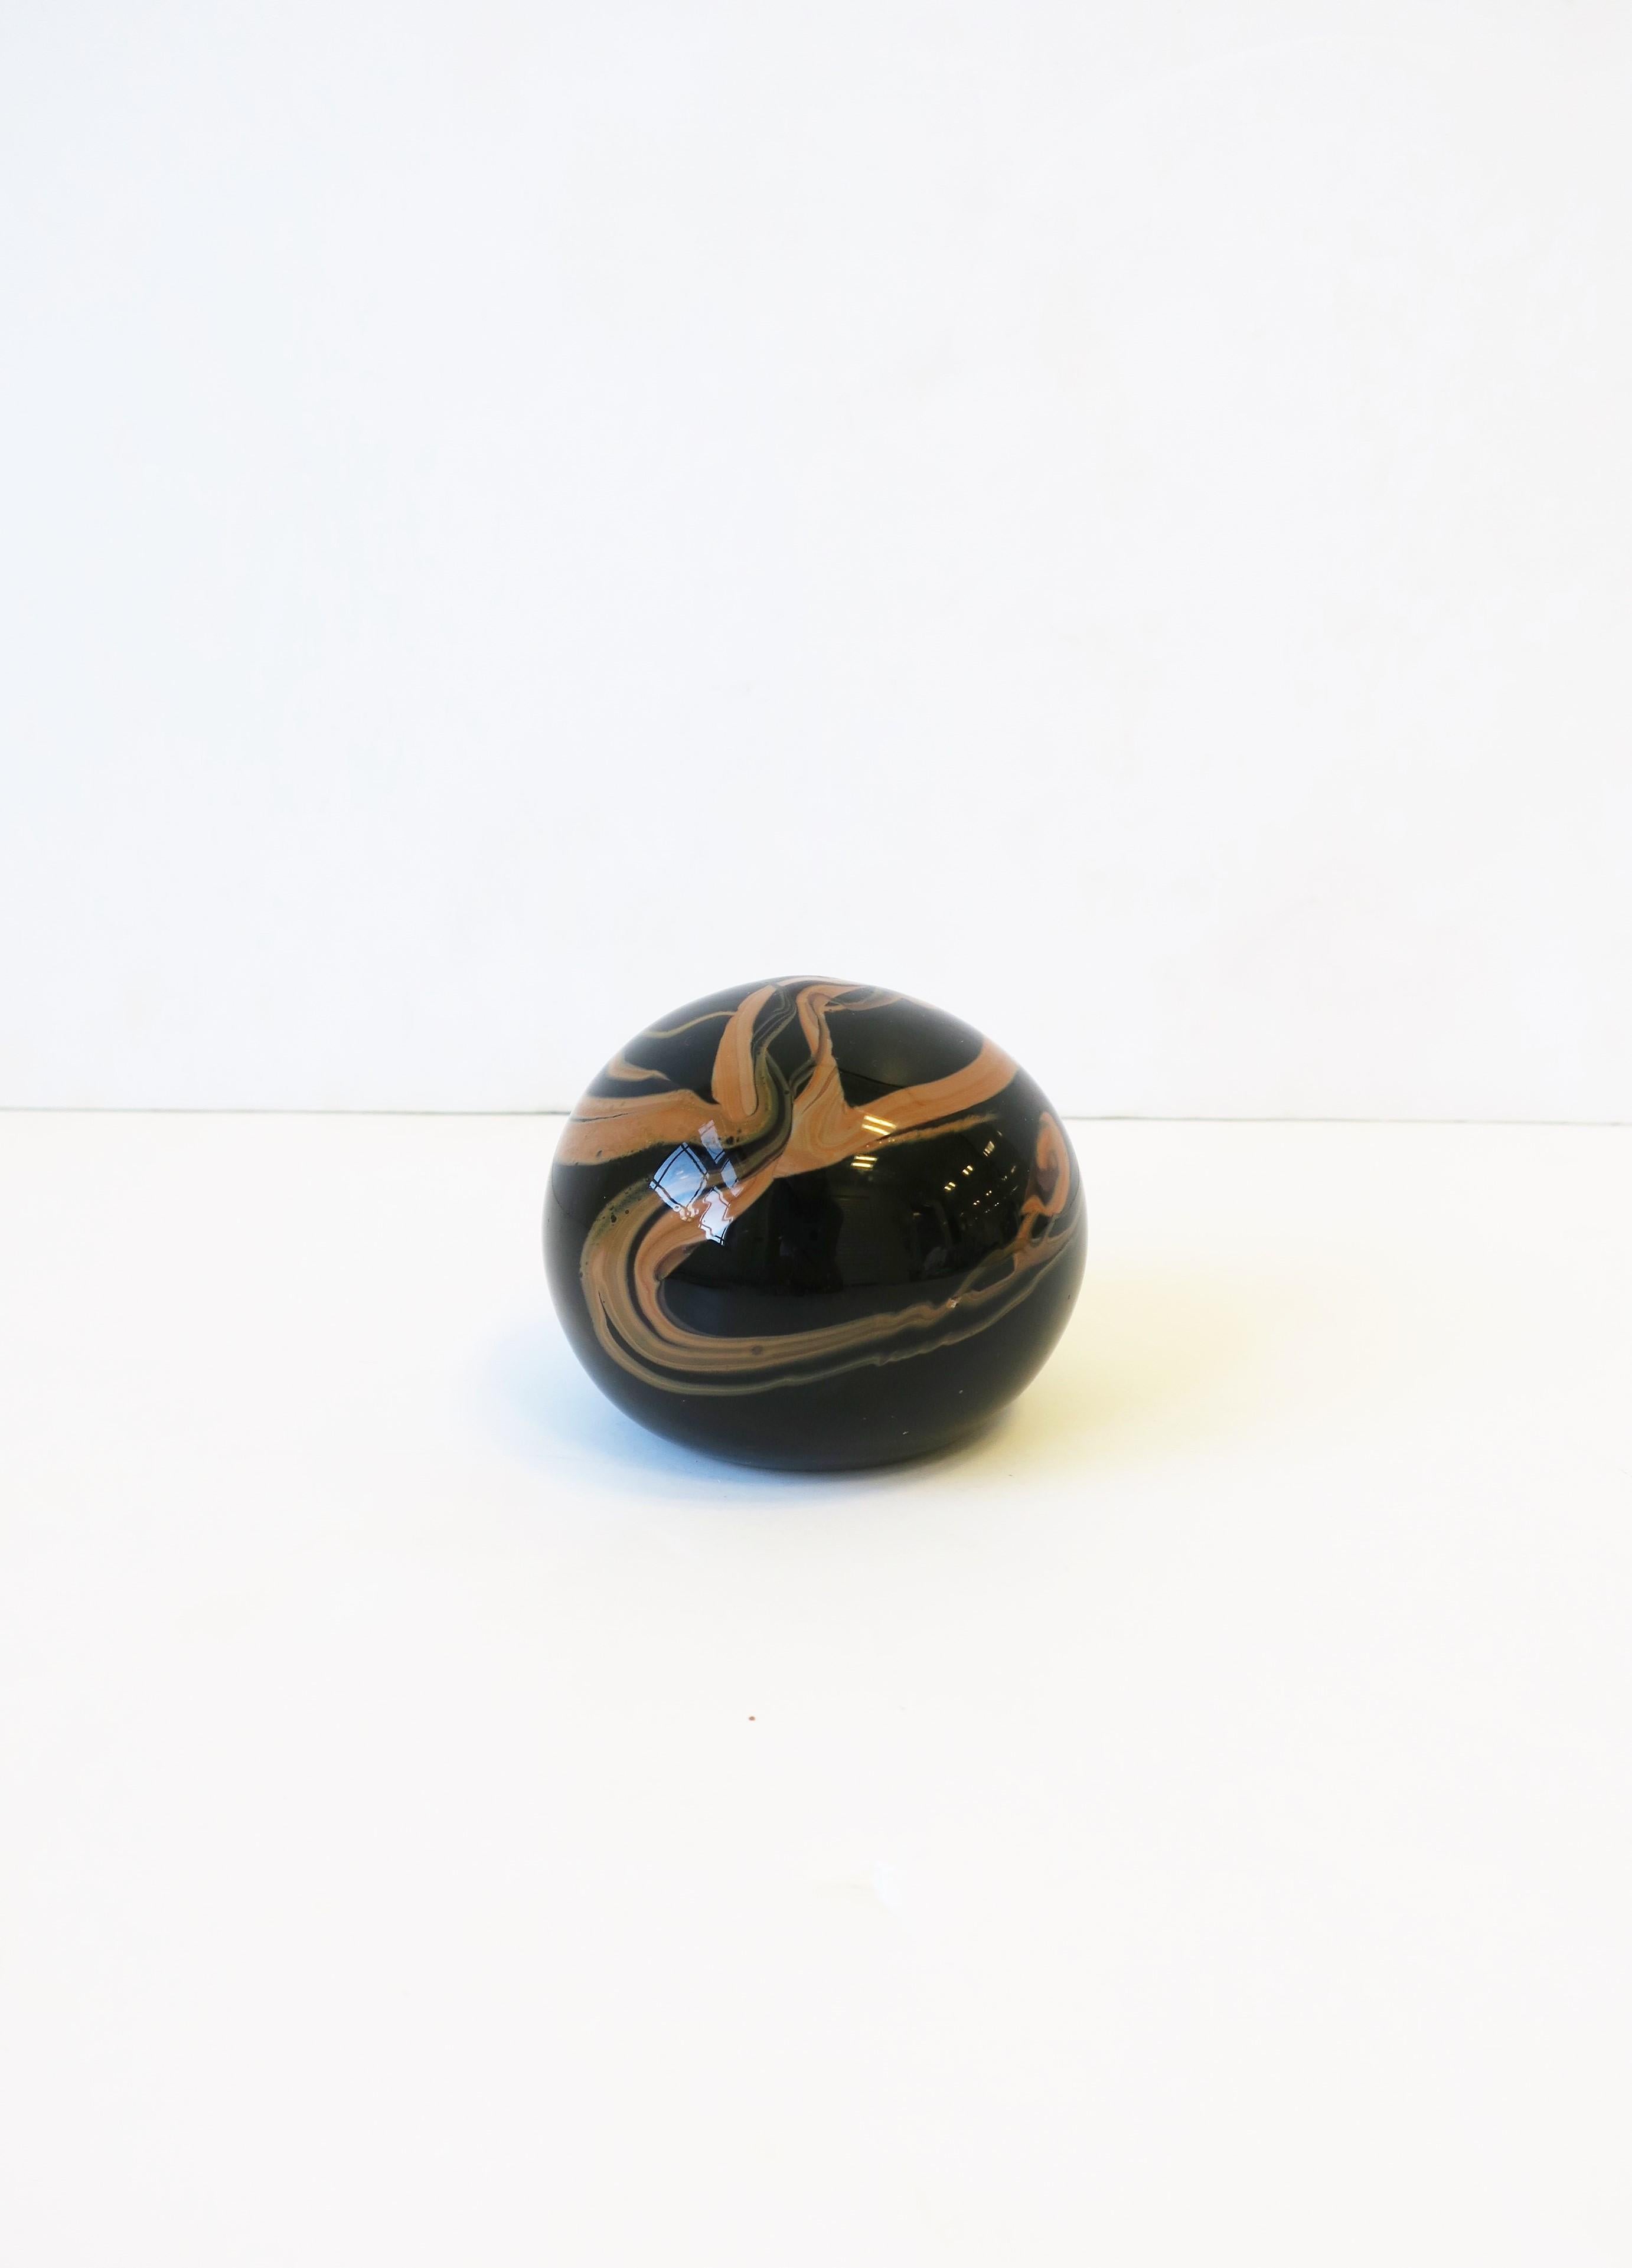 Late 20th Century Modern Black Art Glass Paperweight or Decorative Object, circa 1970s For Sale